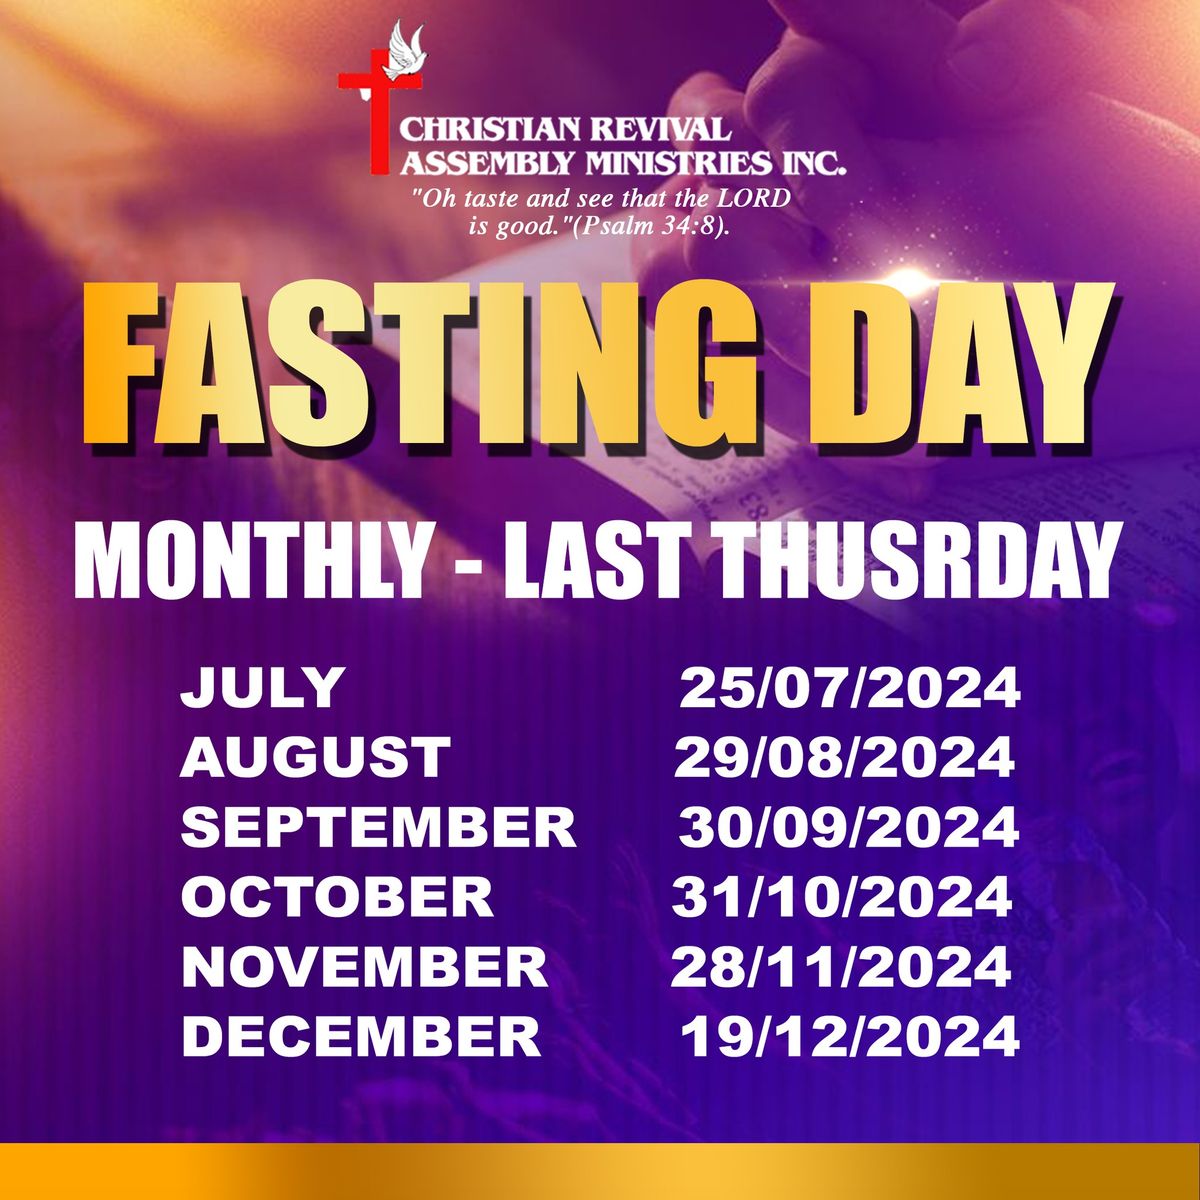 Fasting Day: Monthly - Last Thursday